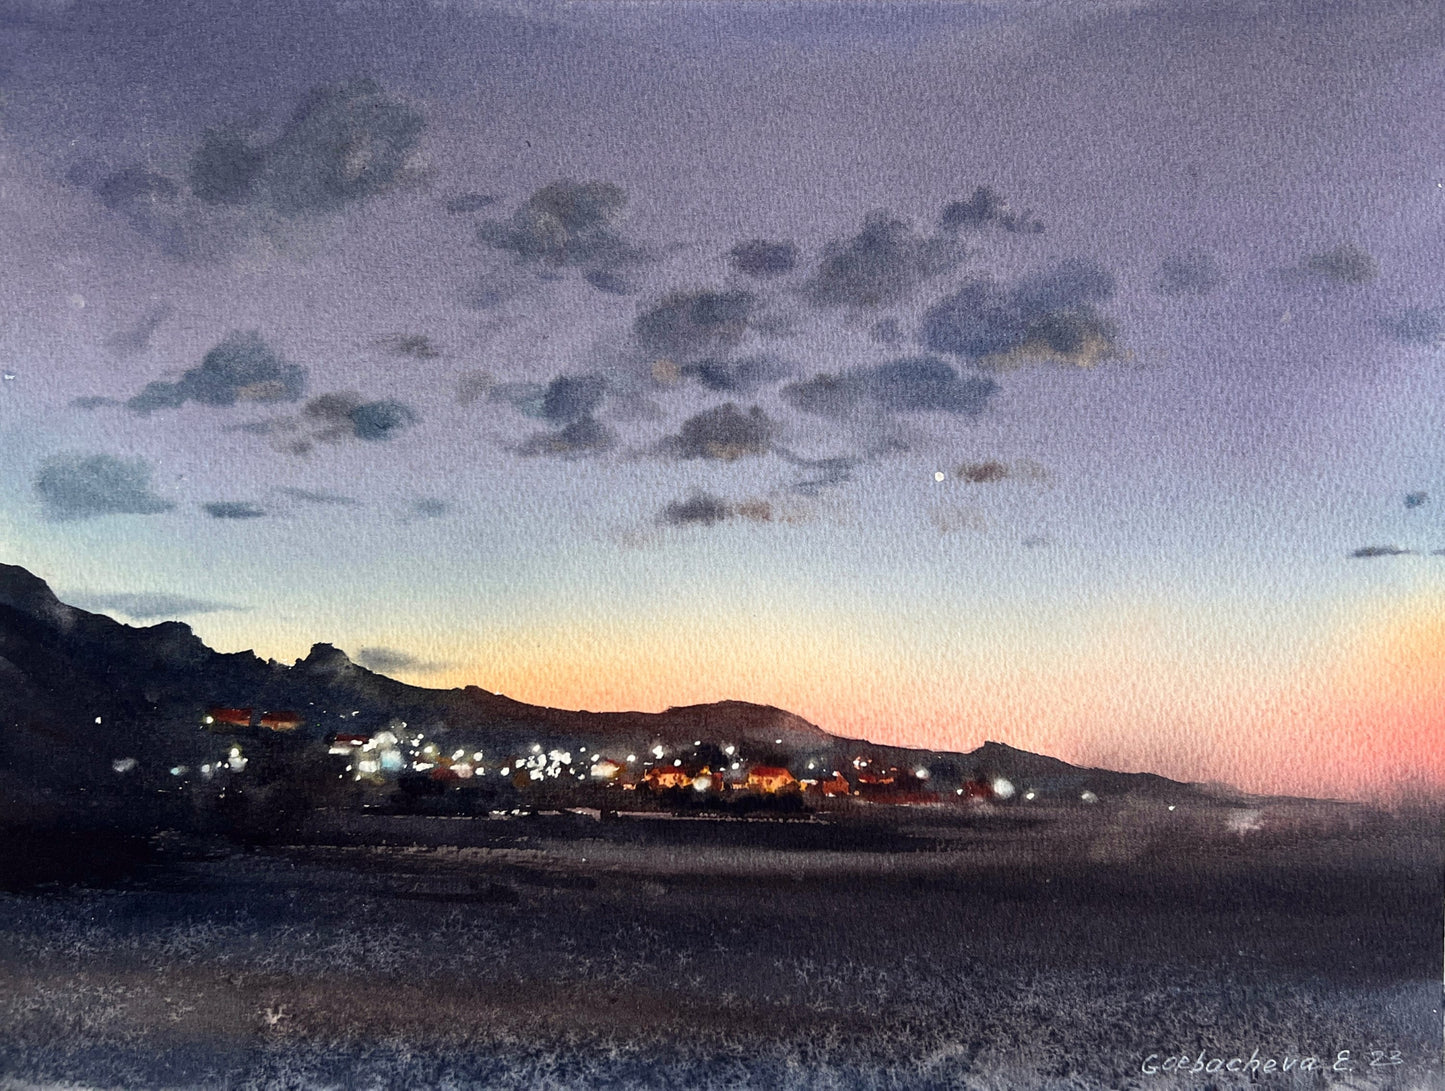 First Star Painting Original Watercolor, Mountain Village Artwork, Evening Sky, Clouds Art, Hand-painted Home Wall Decor